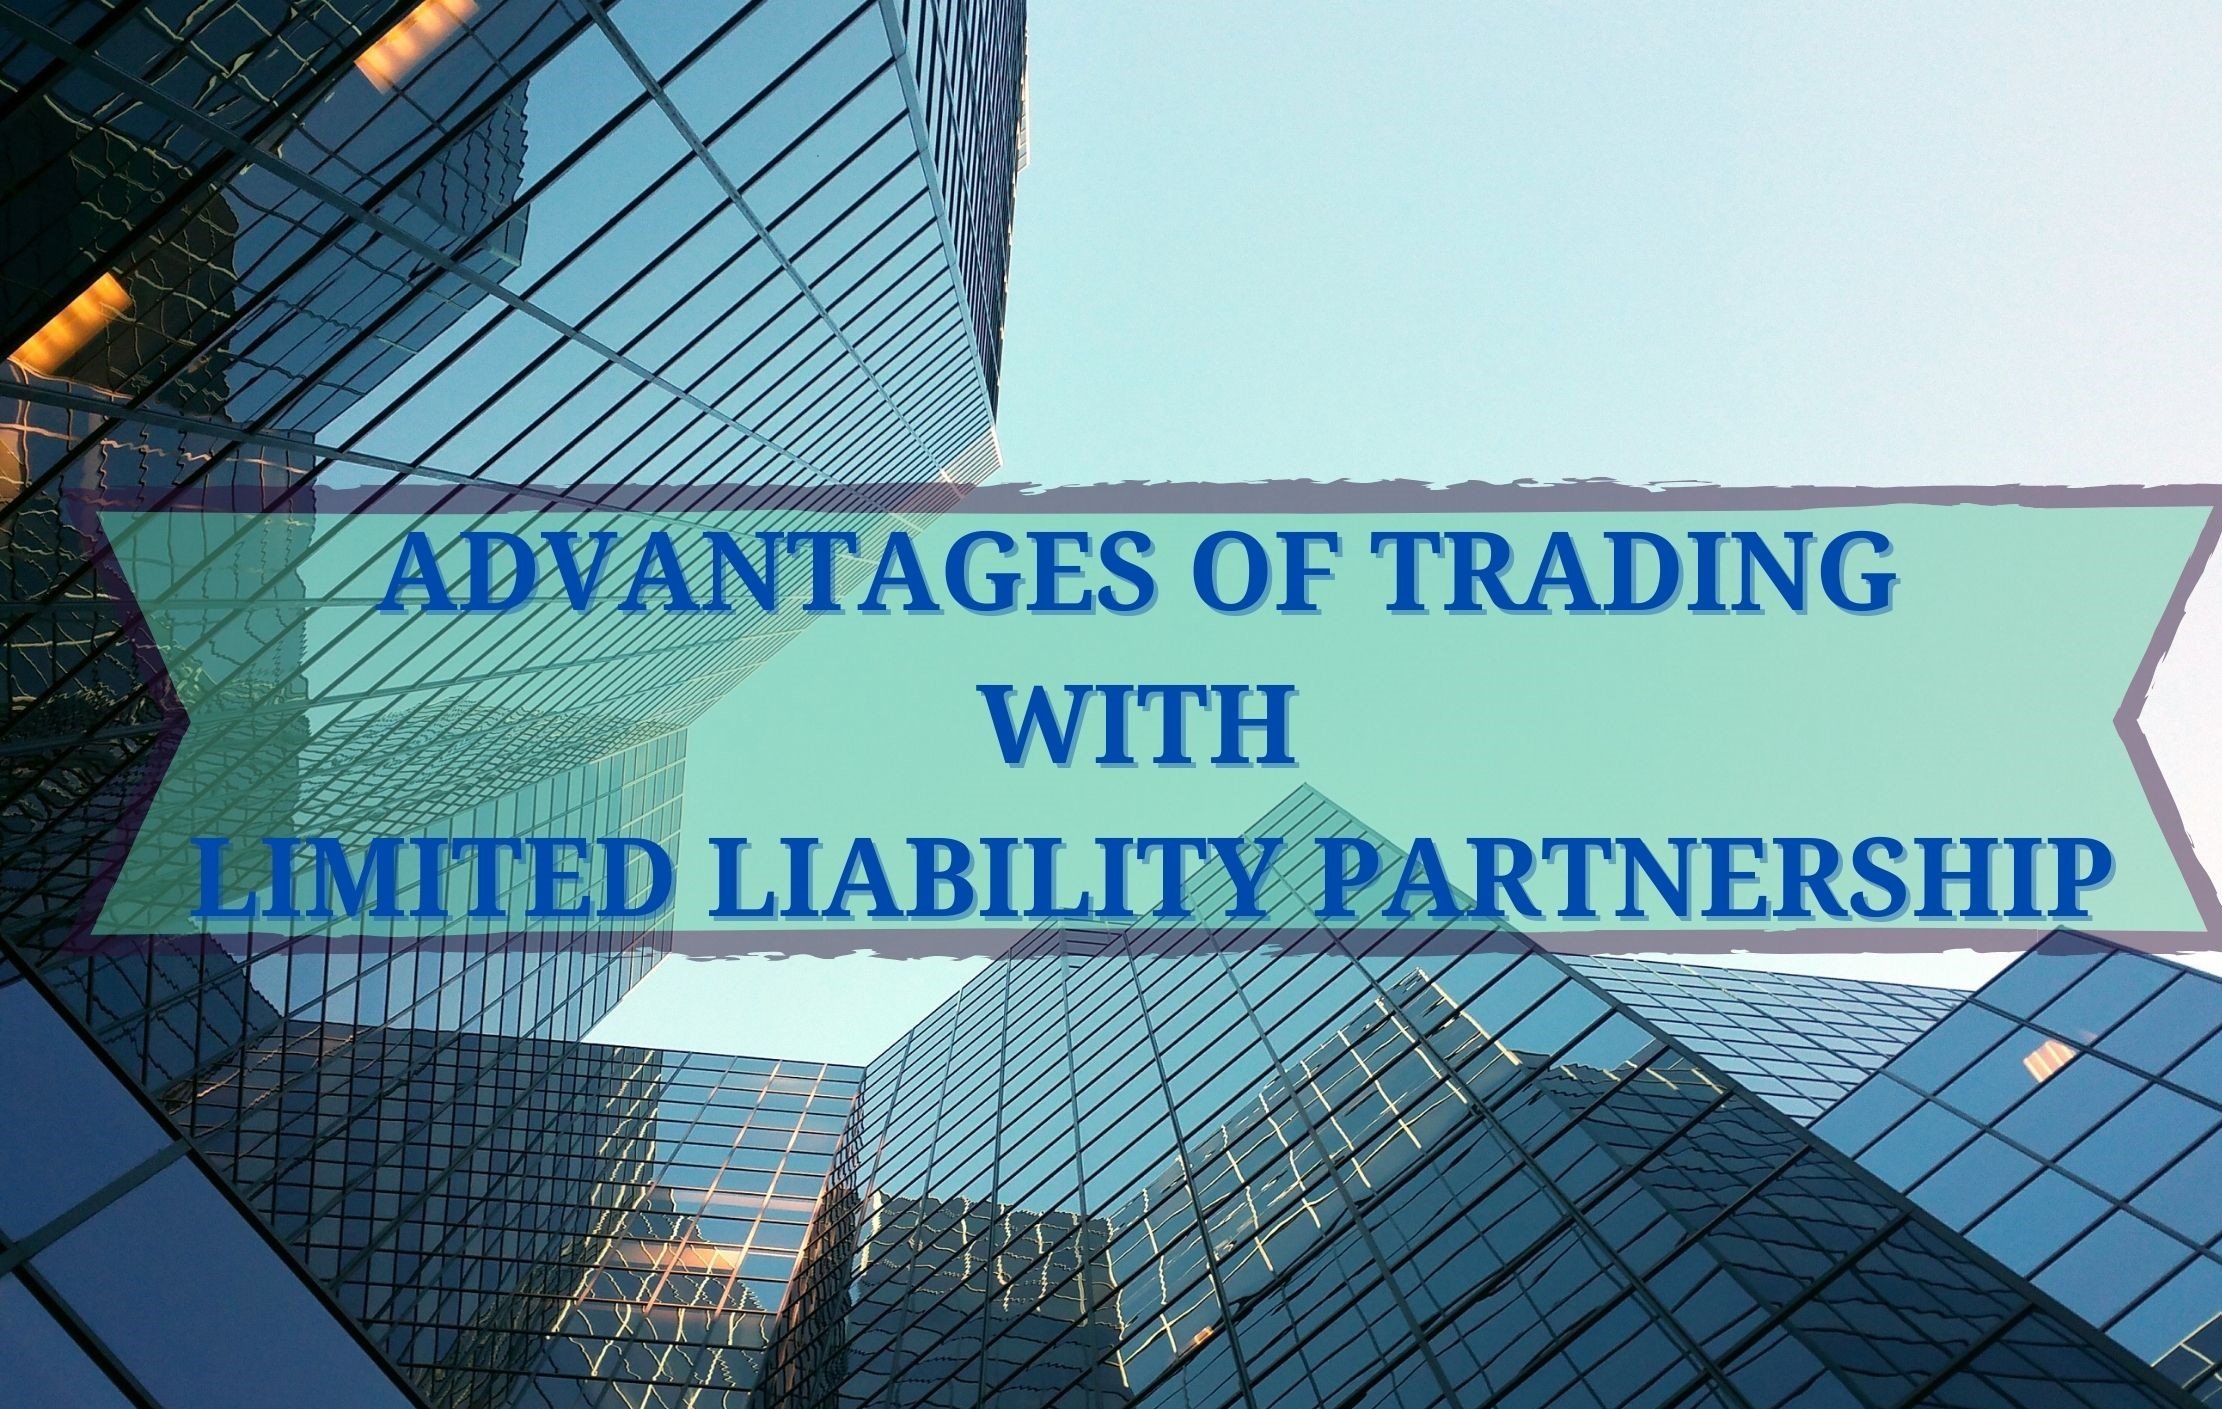 ADVANTAGES OF TRADING WITH LIMITED LIABILITY PARTNERSHIP